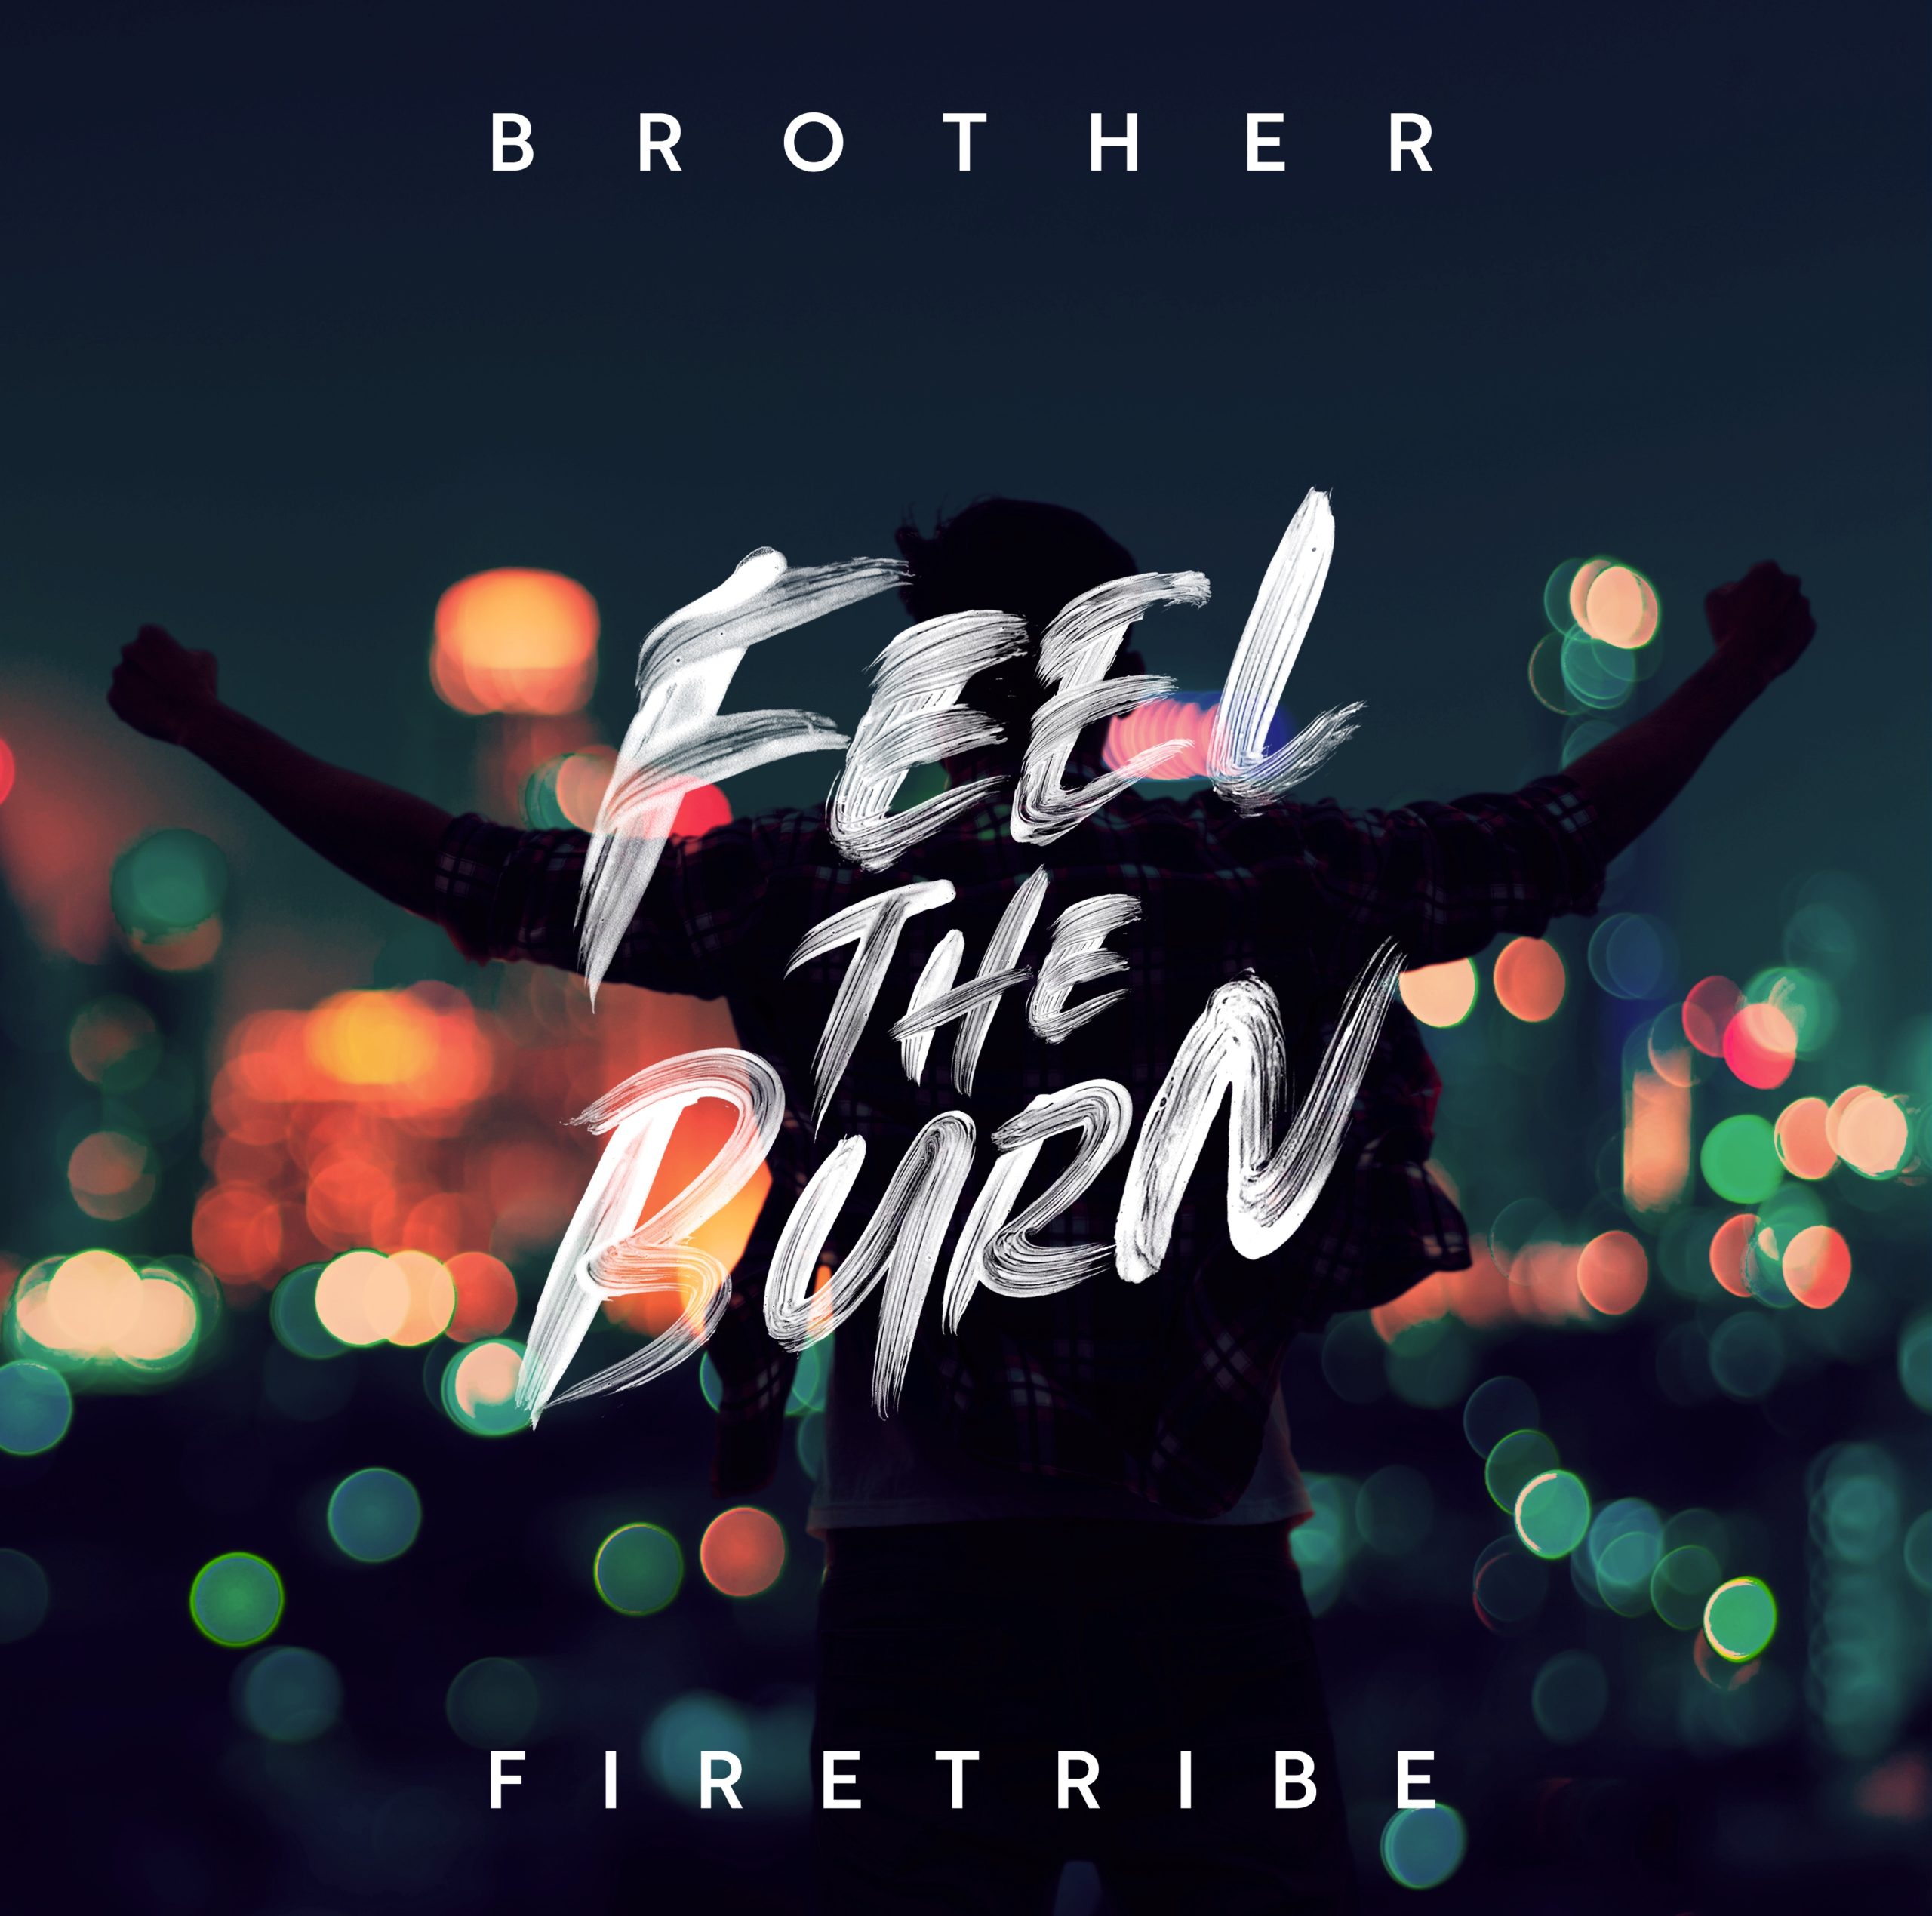 “Many people out there have a need for uplifting music right now” – Interview with Pekka Ansio Heino of Brother Firetribe